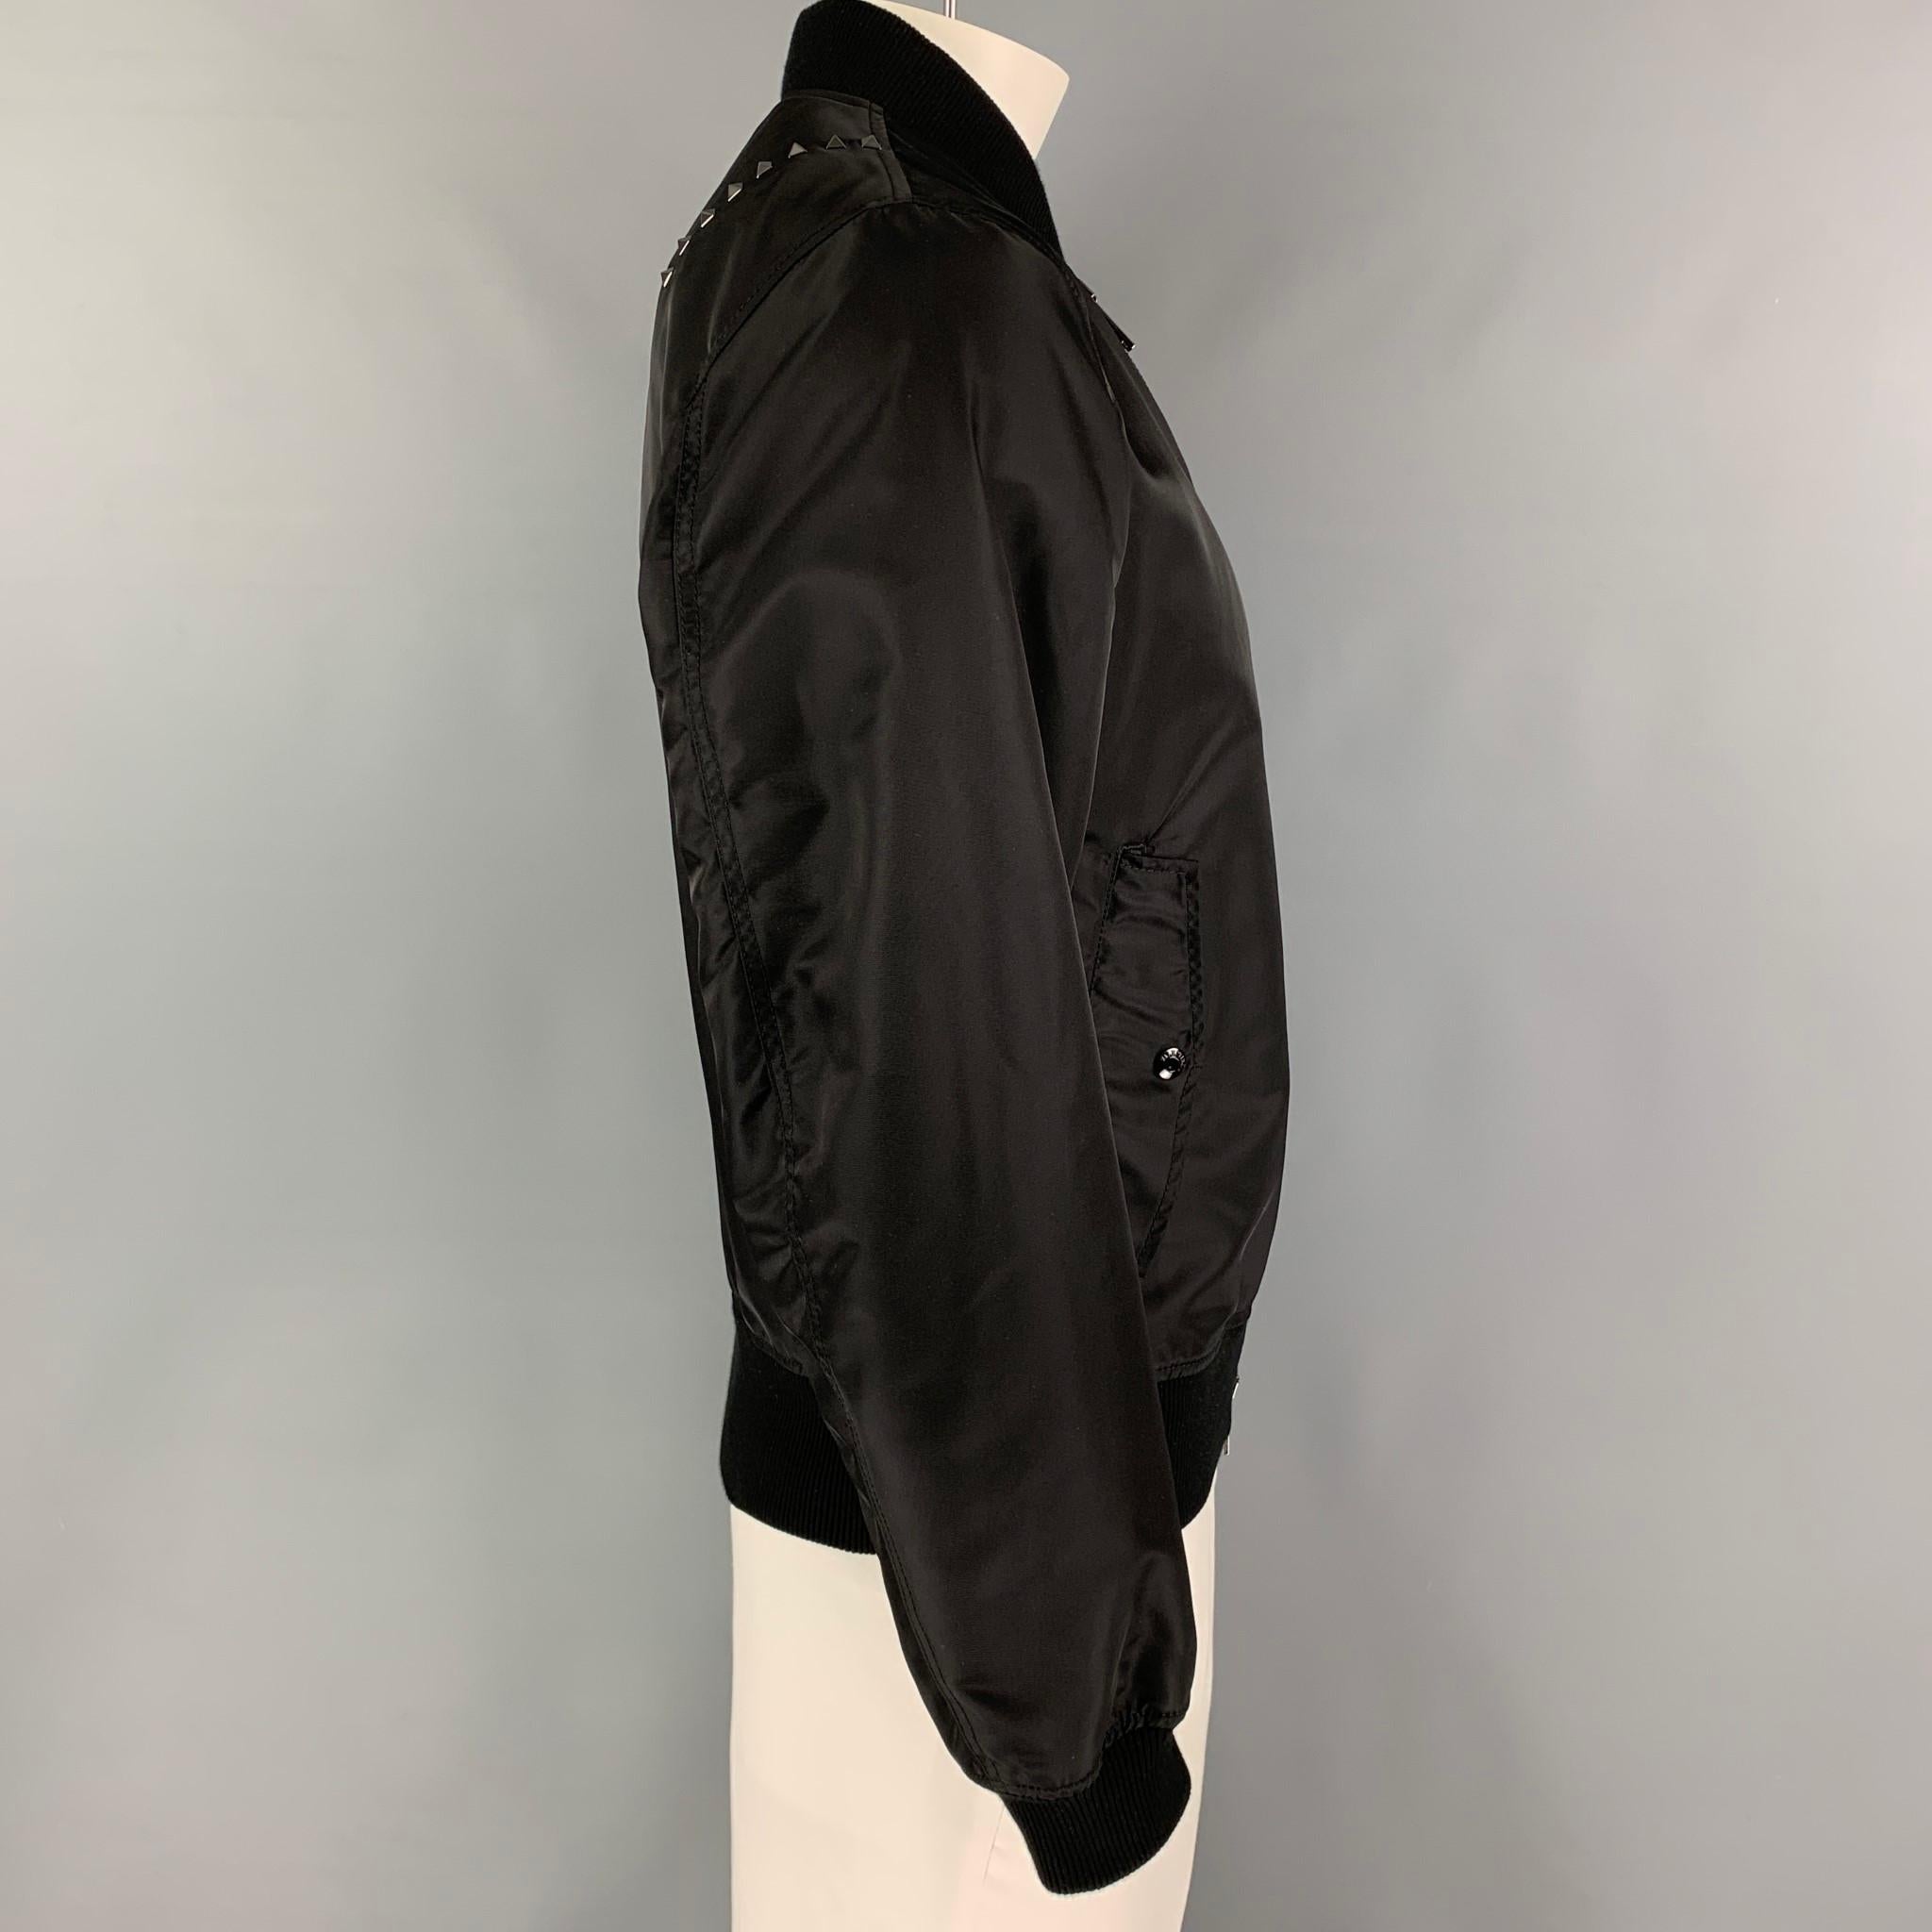 VALENTINO jacket comes in a black polyamide featuring a bomber style, studded embellishments, flap pockets, ribbed hem, and a full zip up closure. Made in Italy. 

Excellent Pre-Owned Condition.
Marked: I 50 / US 40 / F 50

Measurements:

Shoulder: